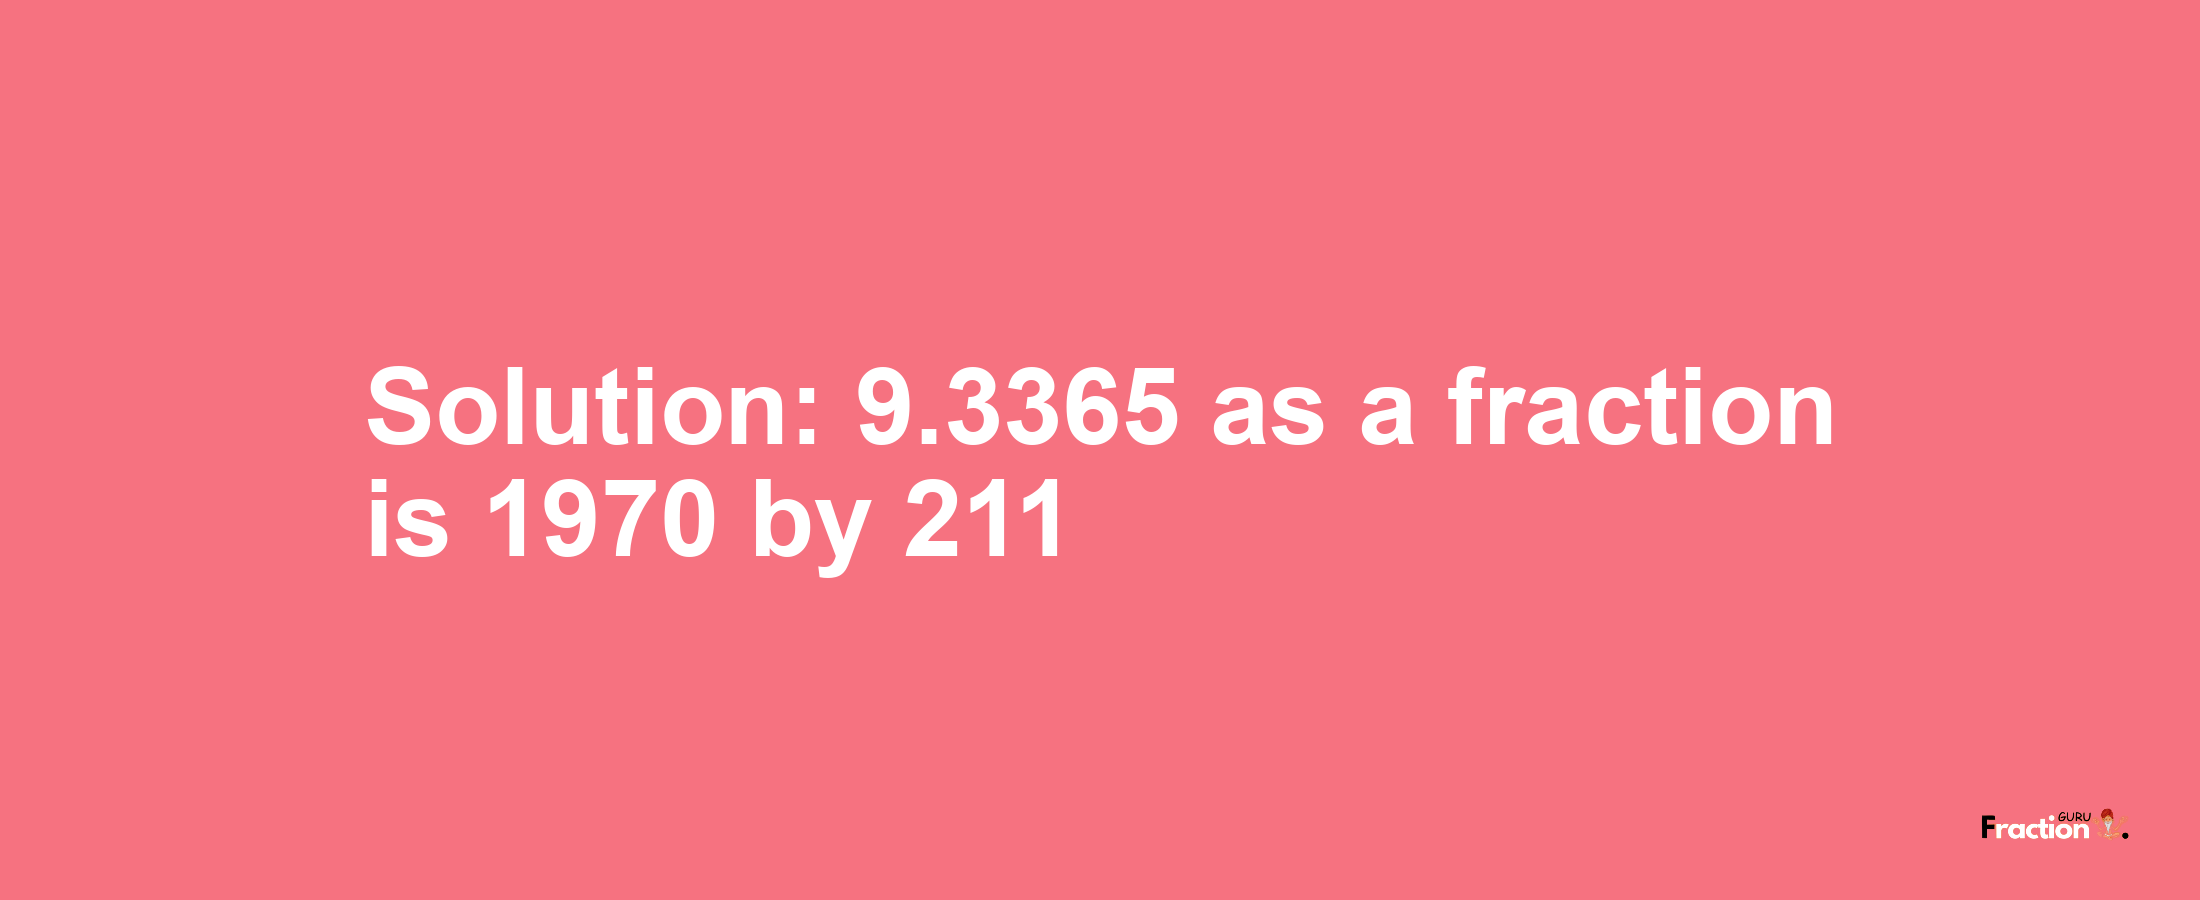 Solution:9.3365 as a fraction is 1970/211